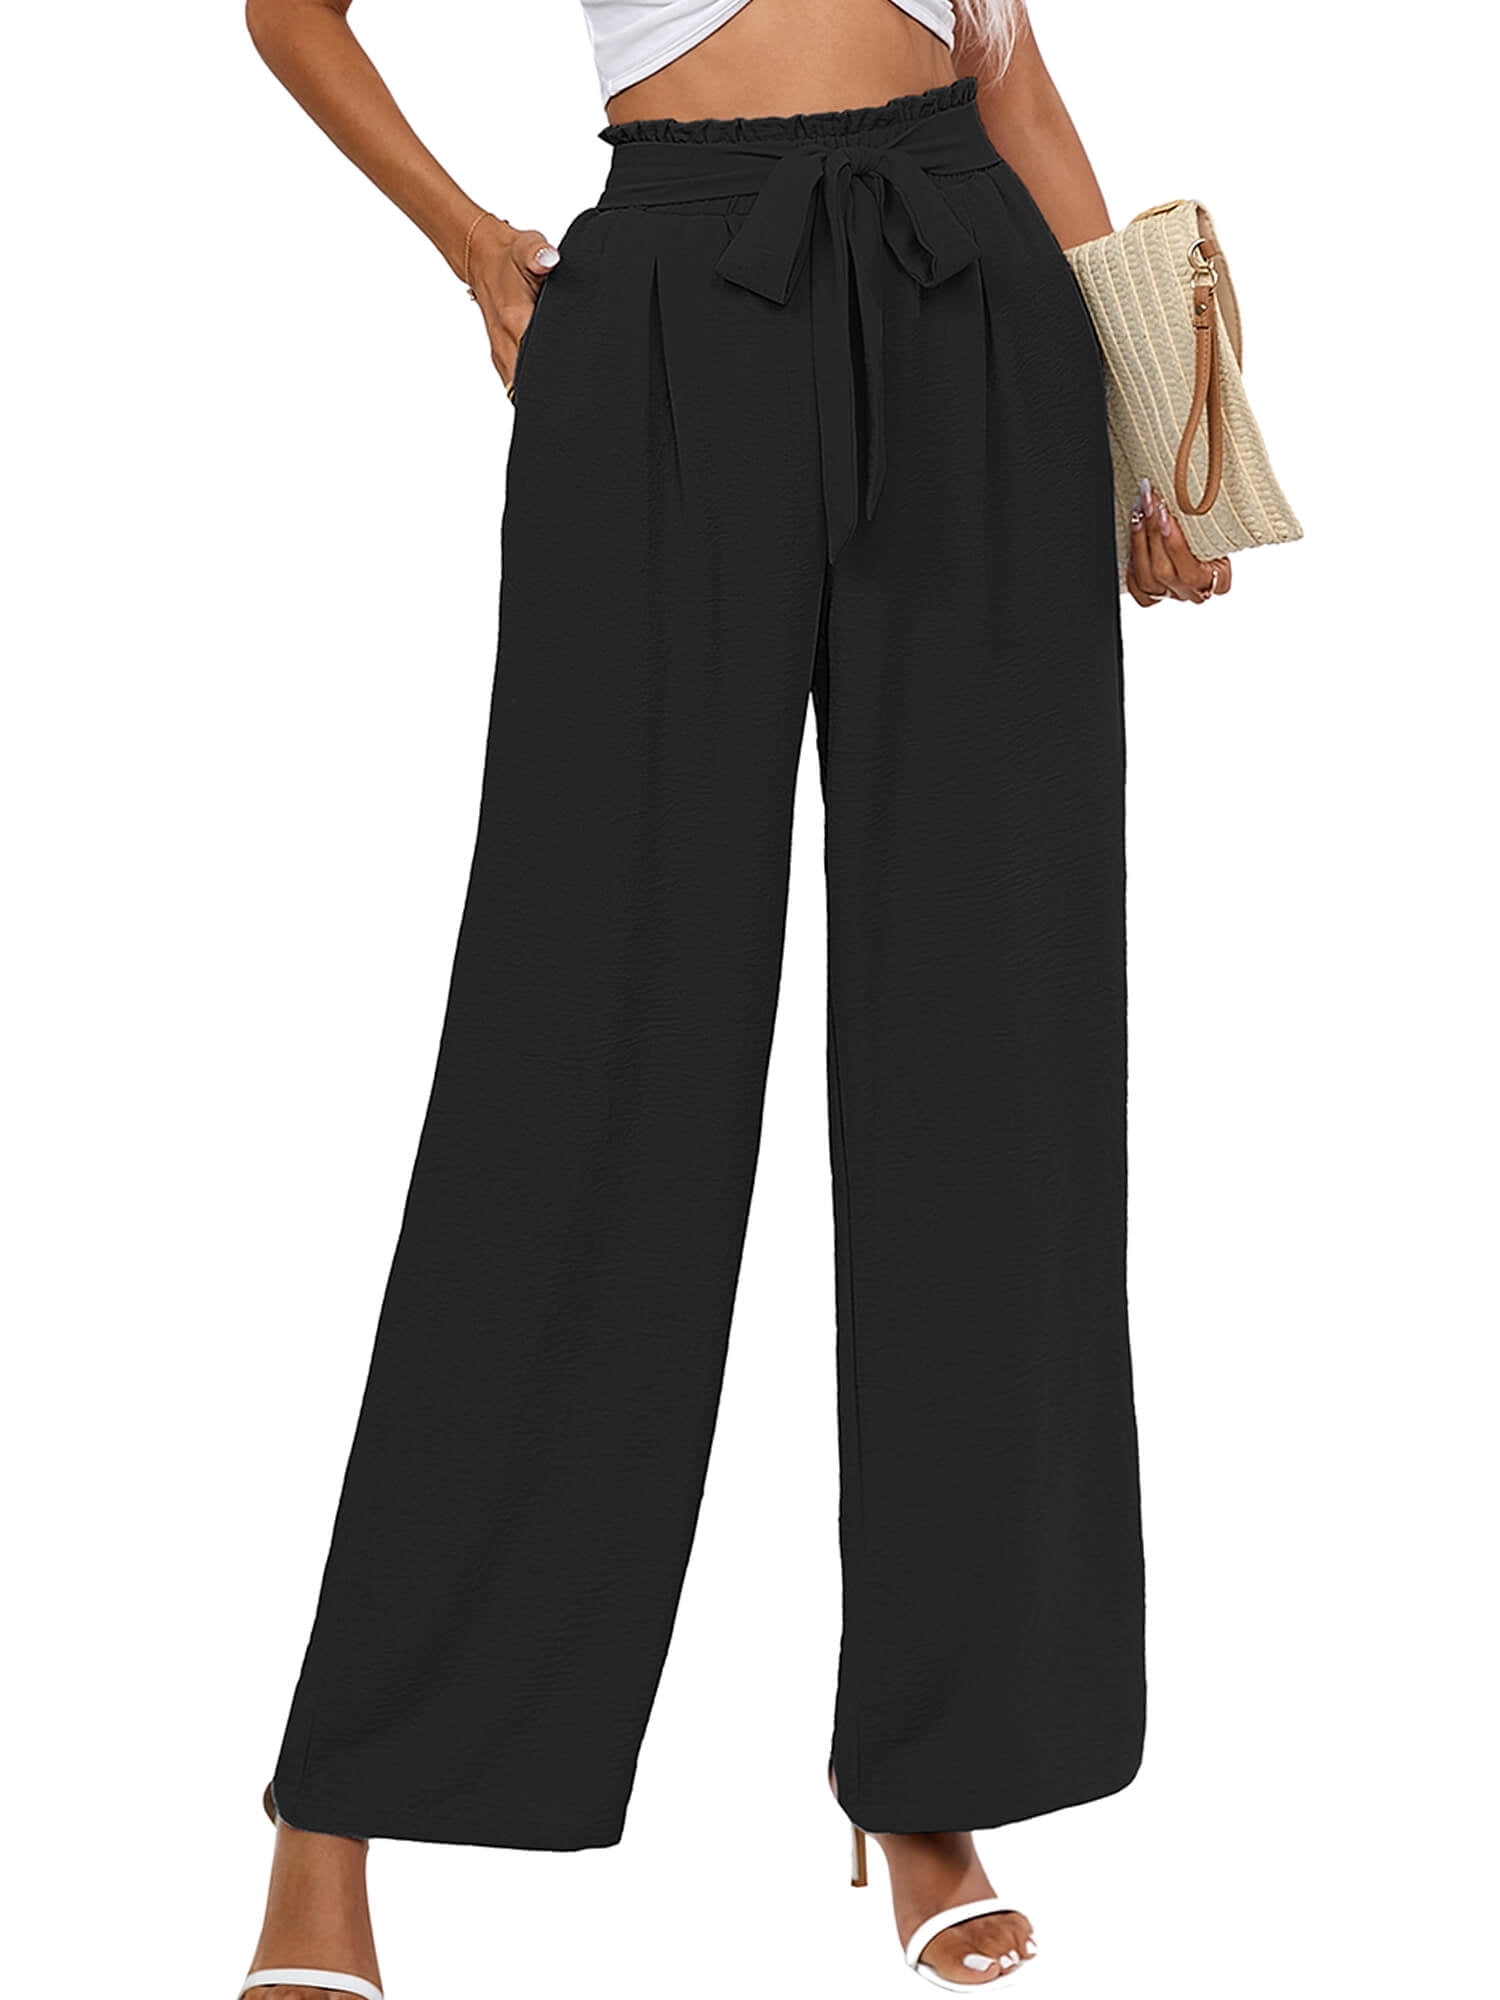 Chiclily Women's Belted Wide Leg Pants with Pockets Lightweight